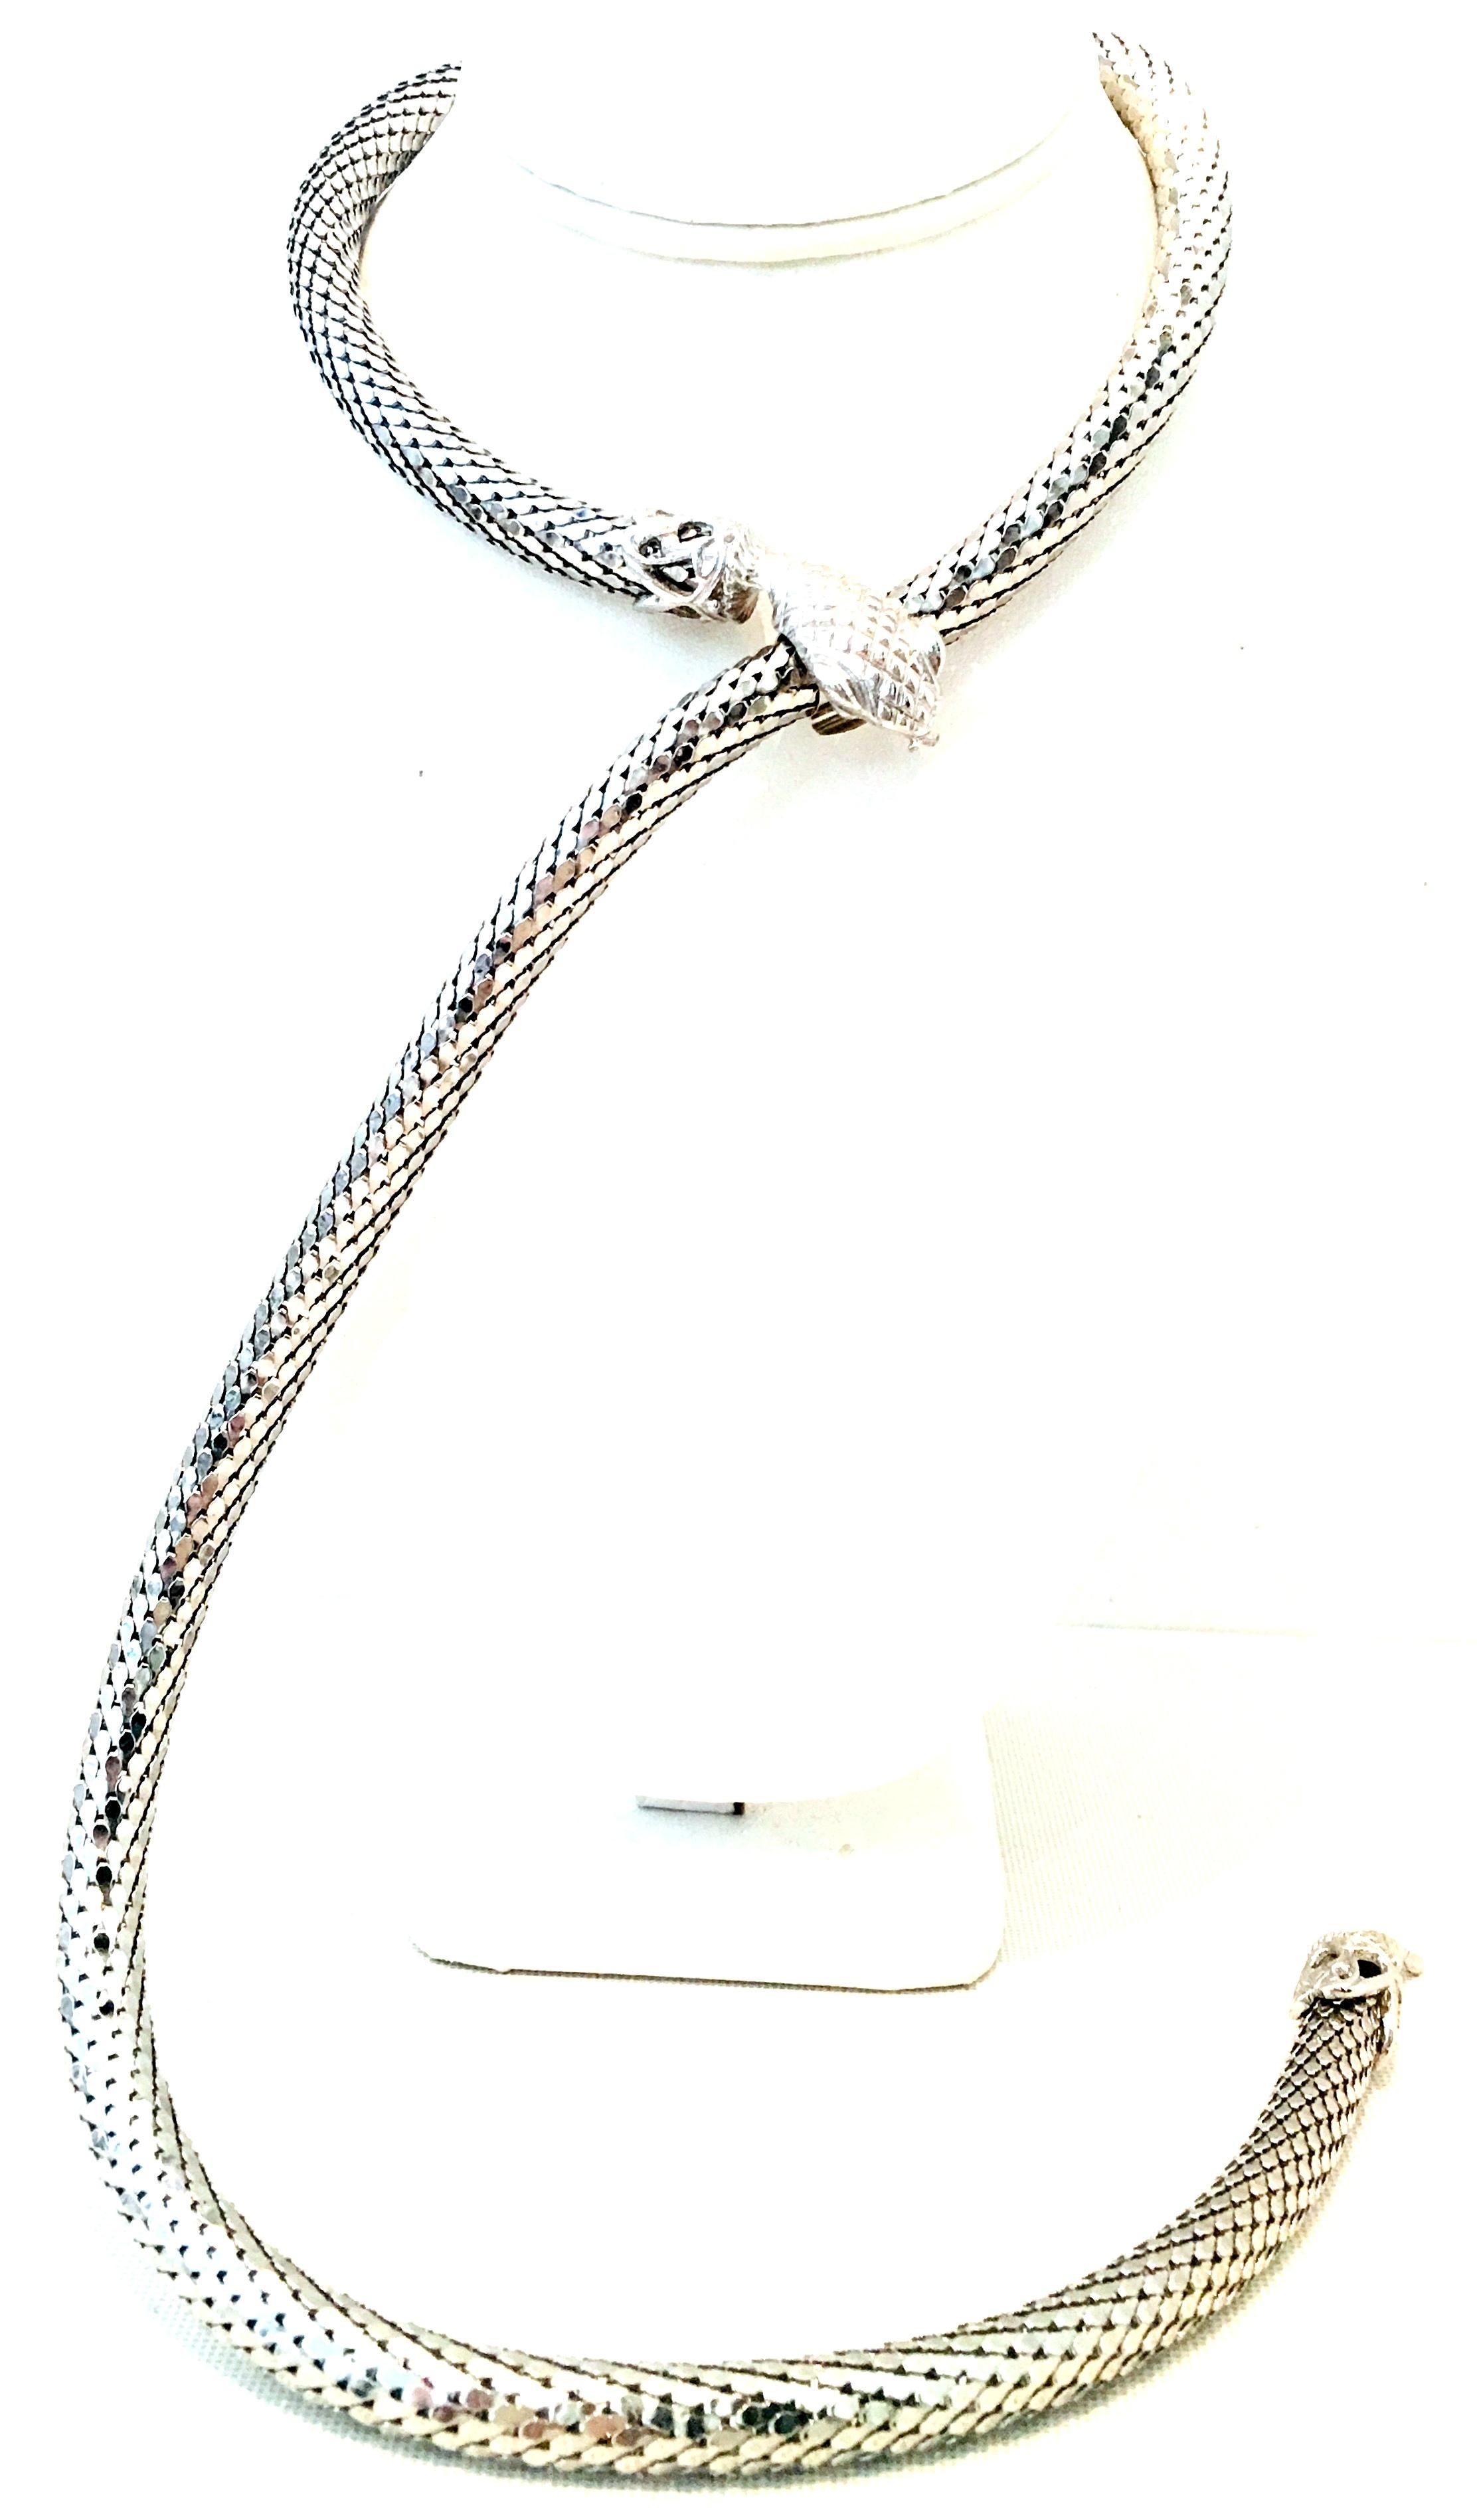 20th Century Silver Metal Mesh Snake Necklace Or Belt By, Whiting & Davis. This iconic and classic 33